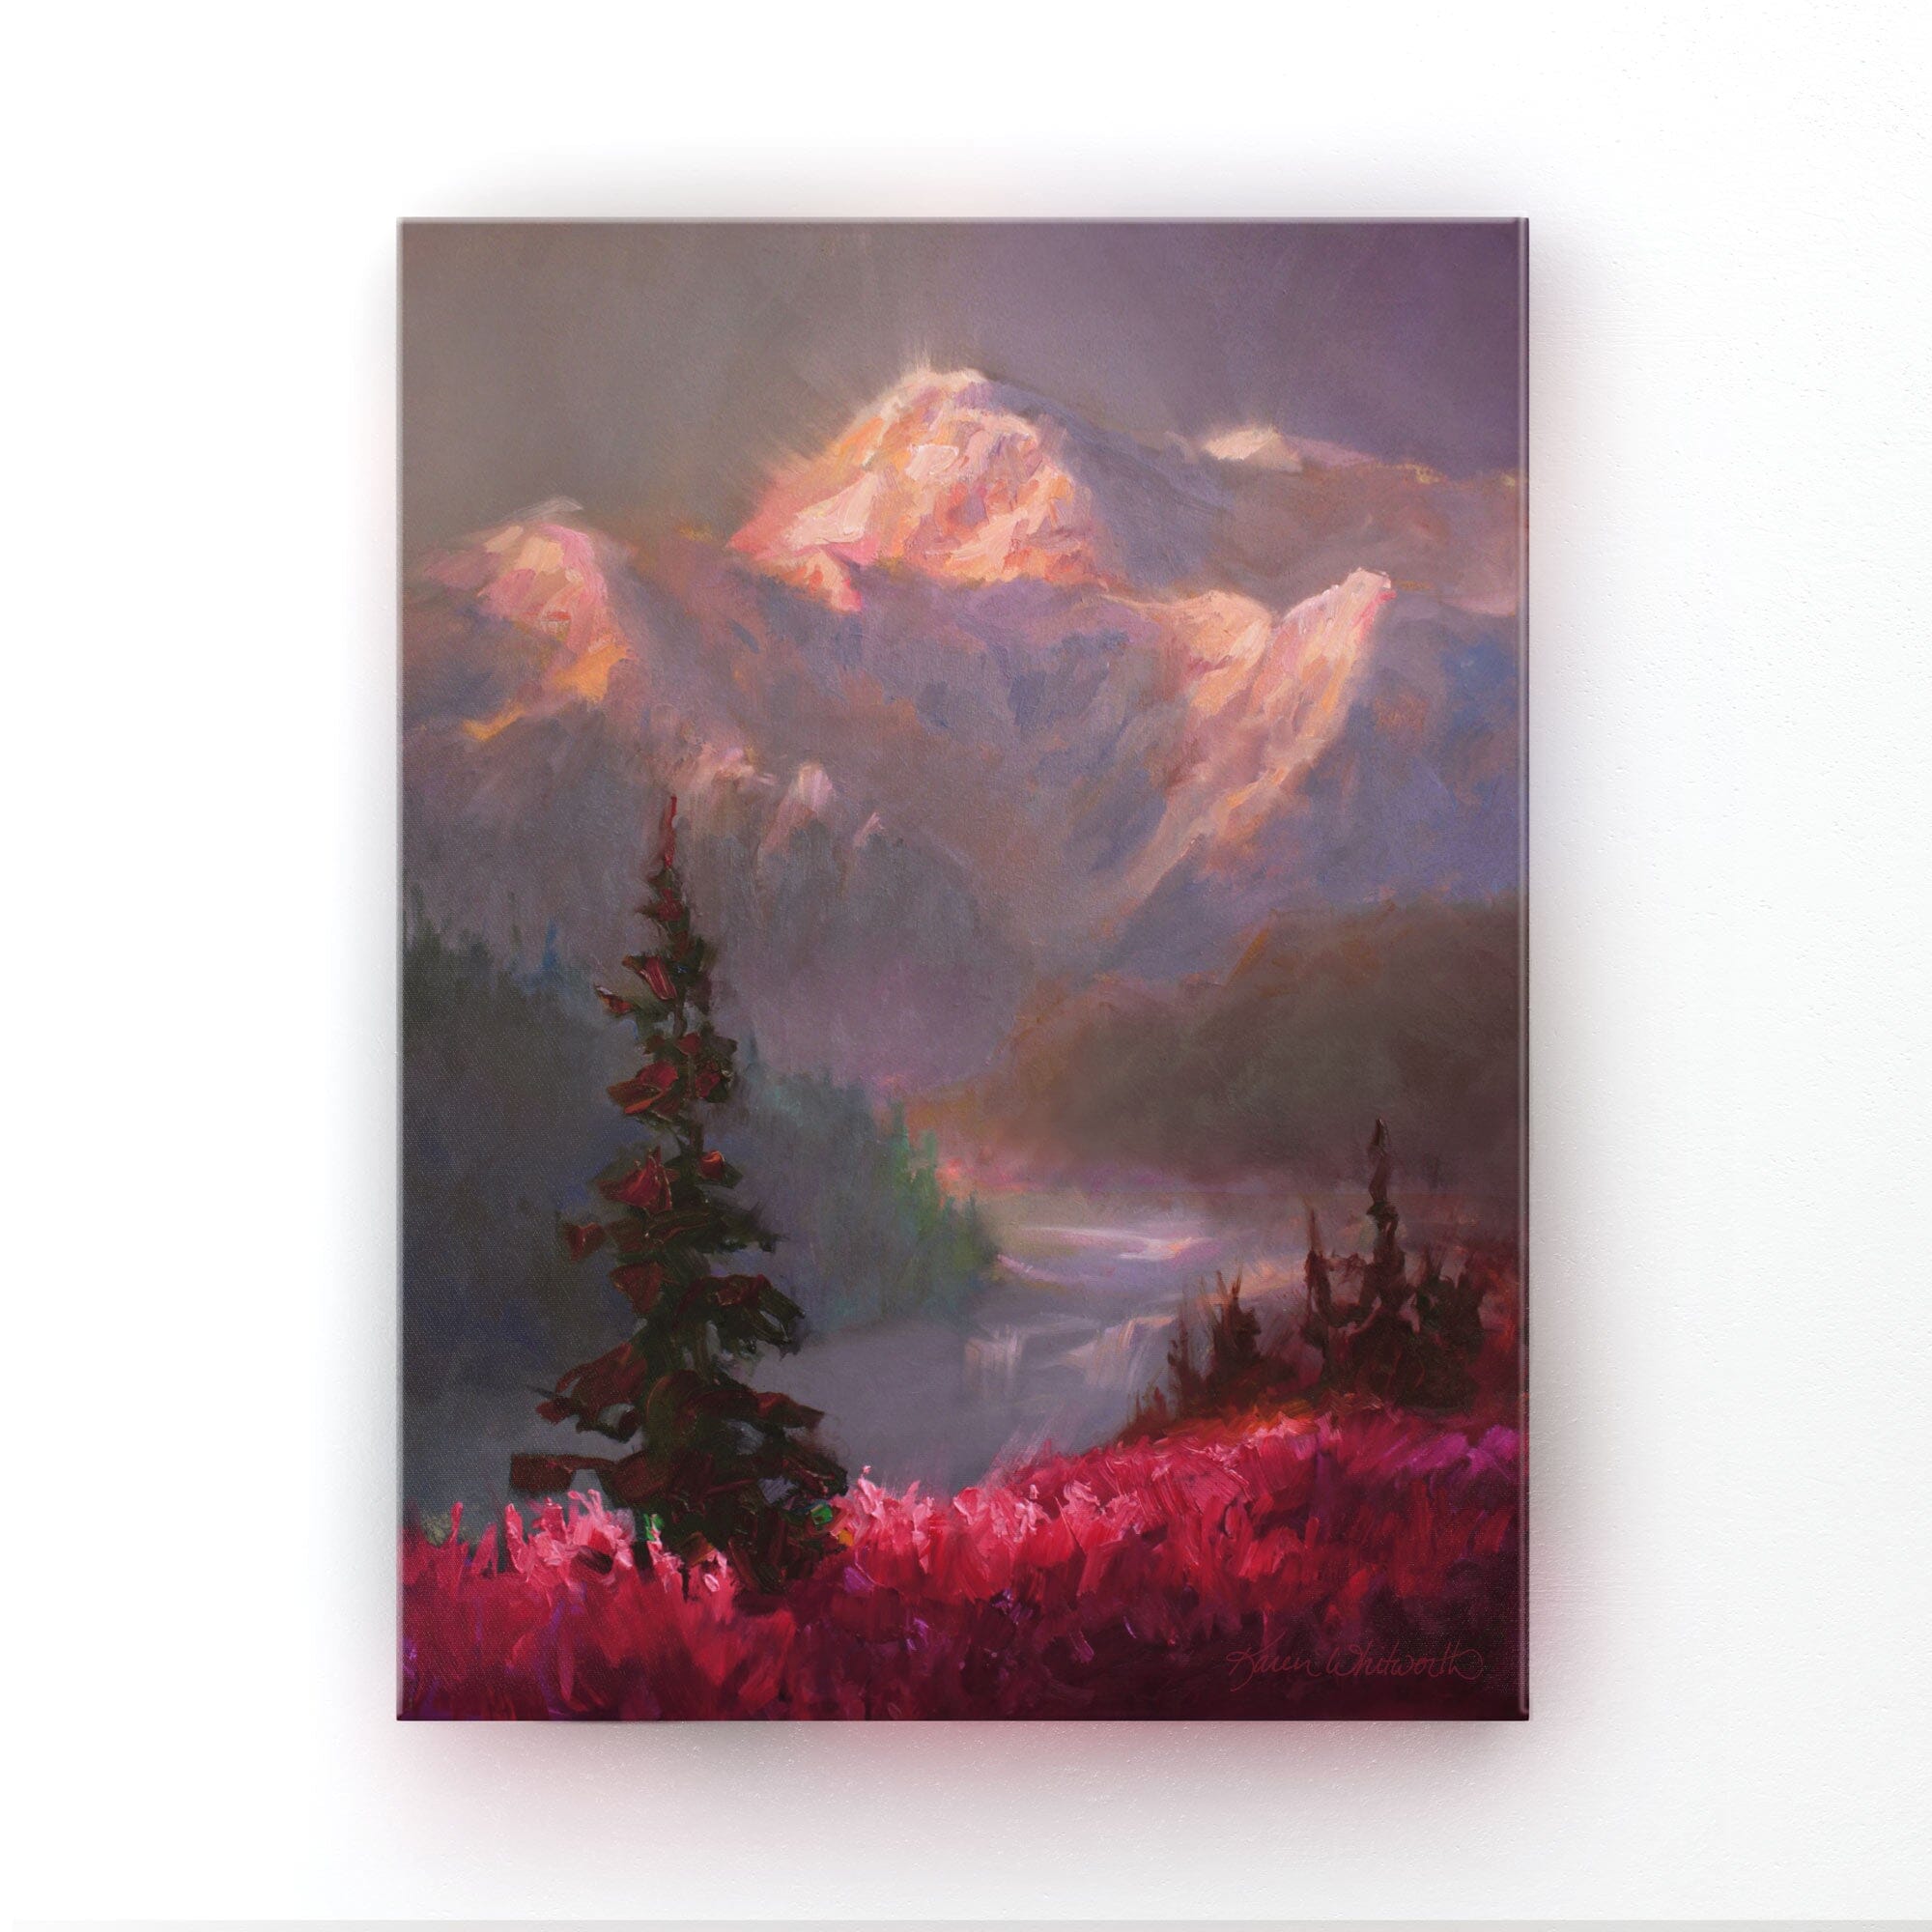 Alaska canvas art of mountain landscape painting depicting Denali in the background and trees and fireweed flowers in the foreground. The wall art is hanging on a white wall. 